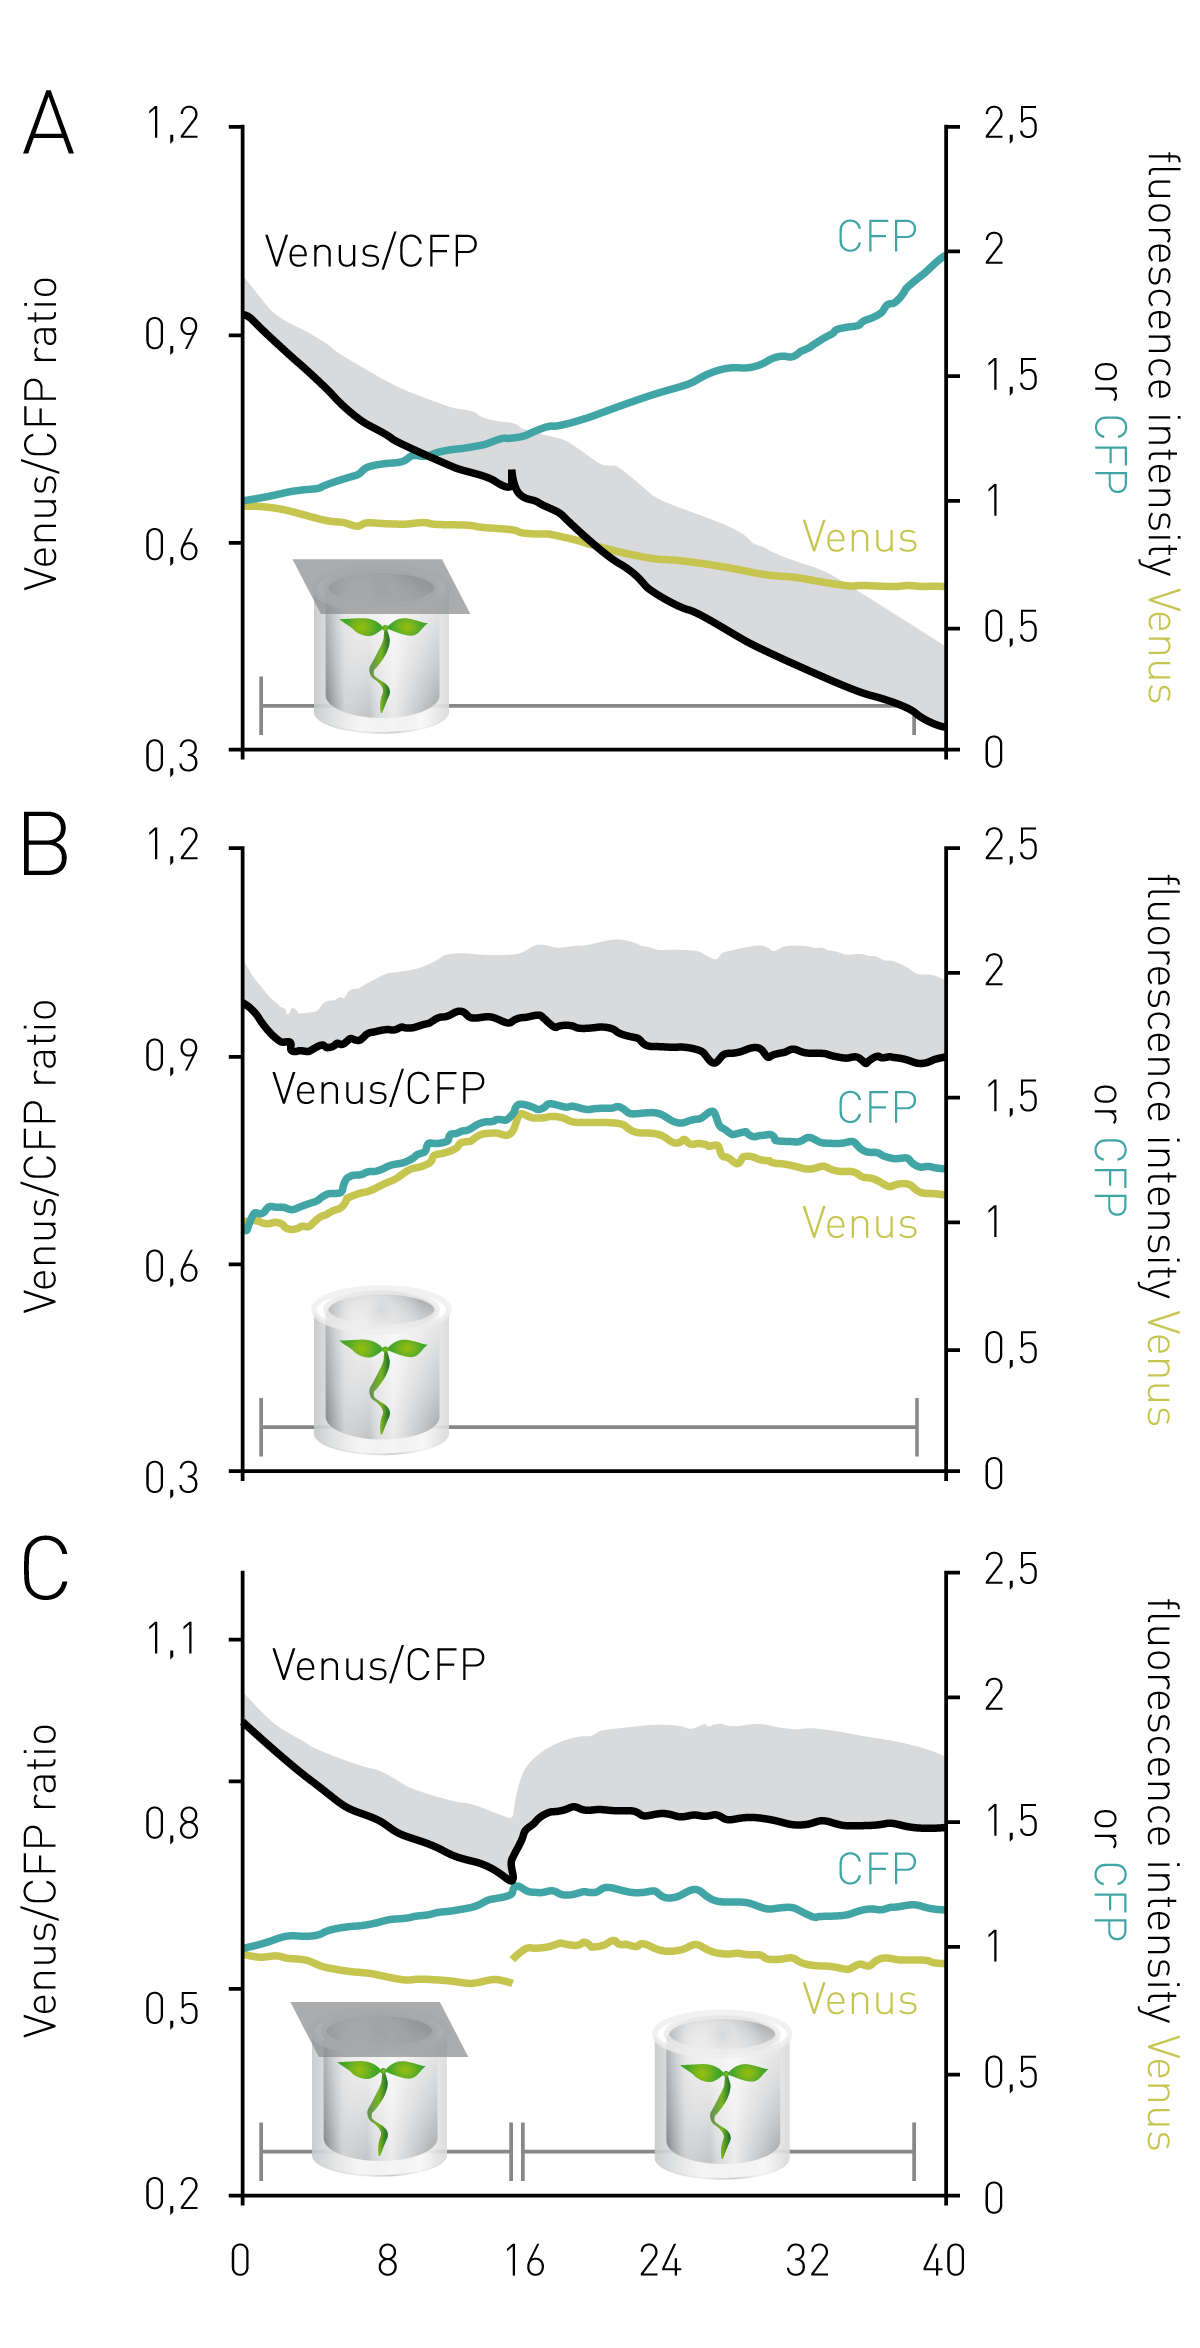 Fig. 2: Plant cytosolic MgATP dynamics under low oxygen stress. Ten-day-old Arabidopsis seedlings expressing cytosolic ATeam and grown in vitro were submerged in assay medium. Three seedlings in each well were excited at 435±10 nm and the emission of CFP (483±9 nm) and Venus (539±6.5 nm) was read using well multichromatics. Wells in (A) were sealed with a transparent film to limit oxygen resupply; wells in (B) were left unsealed as a control and wells in (C) were ﬁrst sealed and then un-sealed after 16 h to allow re-oxygenation of seedlings. Each panel shows the normalized Venus/CFP ratio (black, primary axis) averaged from 12-16 wells. Error bars (grey) are SD. Additionally, each panel shows the normalized emission intensities of Venus (yellow) and CFP (cyan) averaged from the same wells (secondary axis). Figure adapted from Ref. 2.